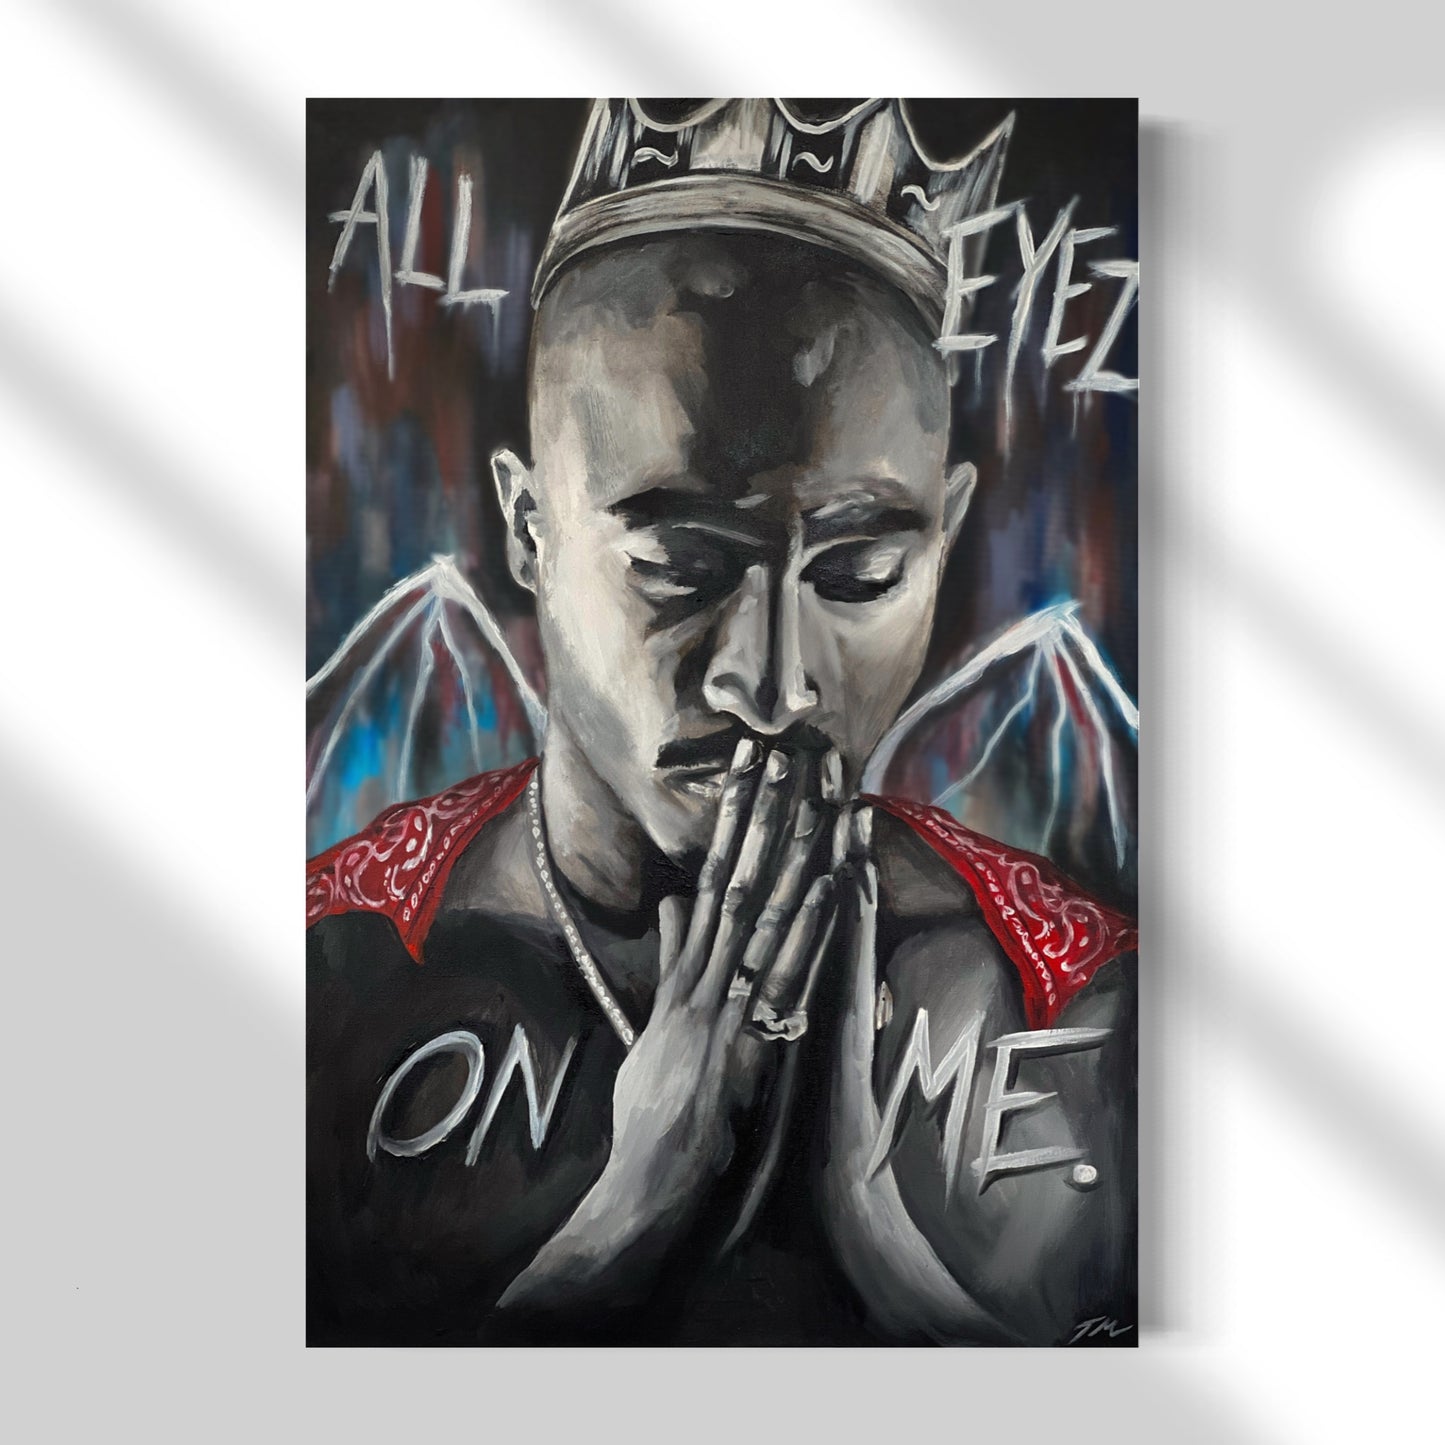 All Eyes On Me - Poster Print